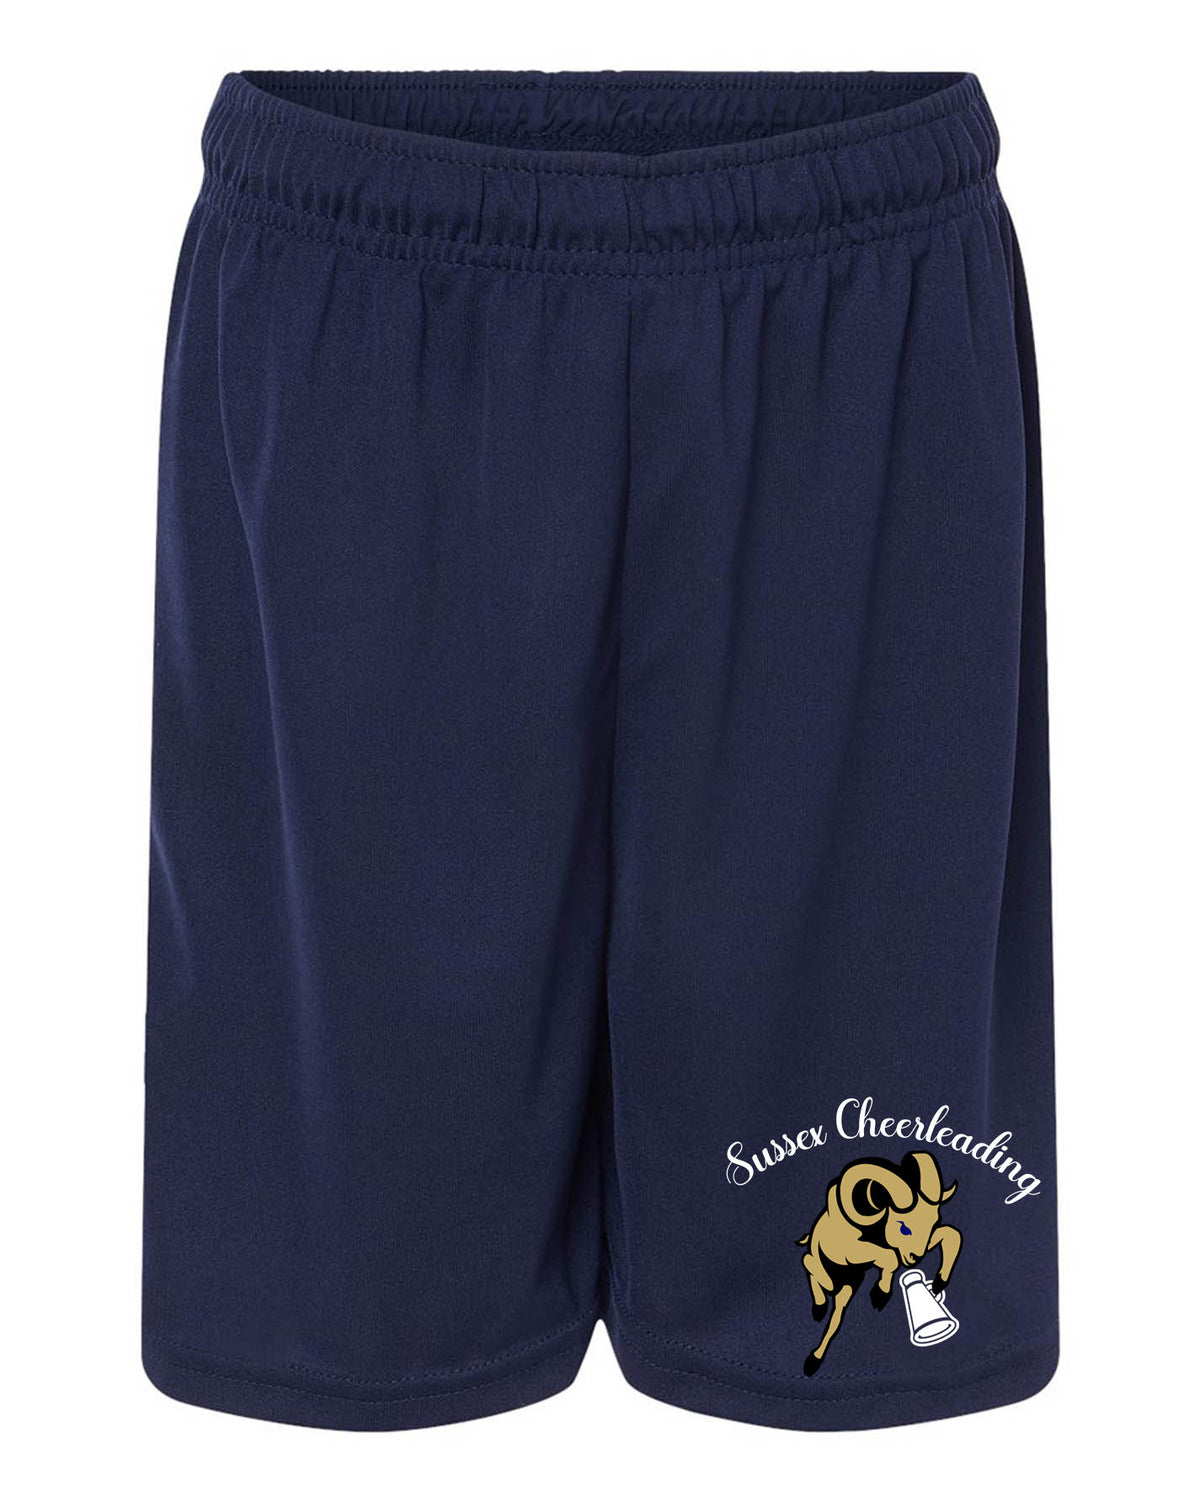 Sussex Middle Cheer Performance Shorts Design 3